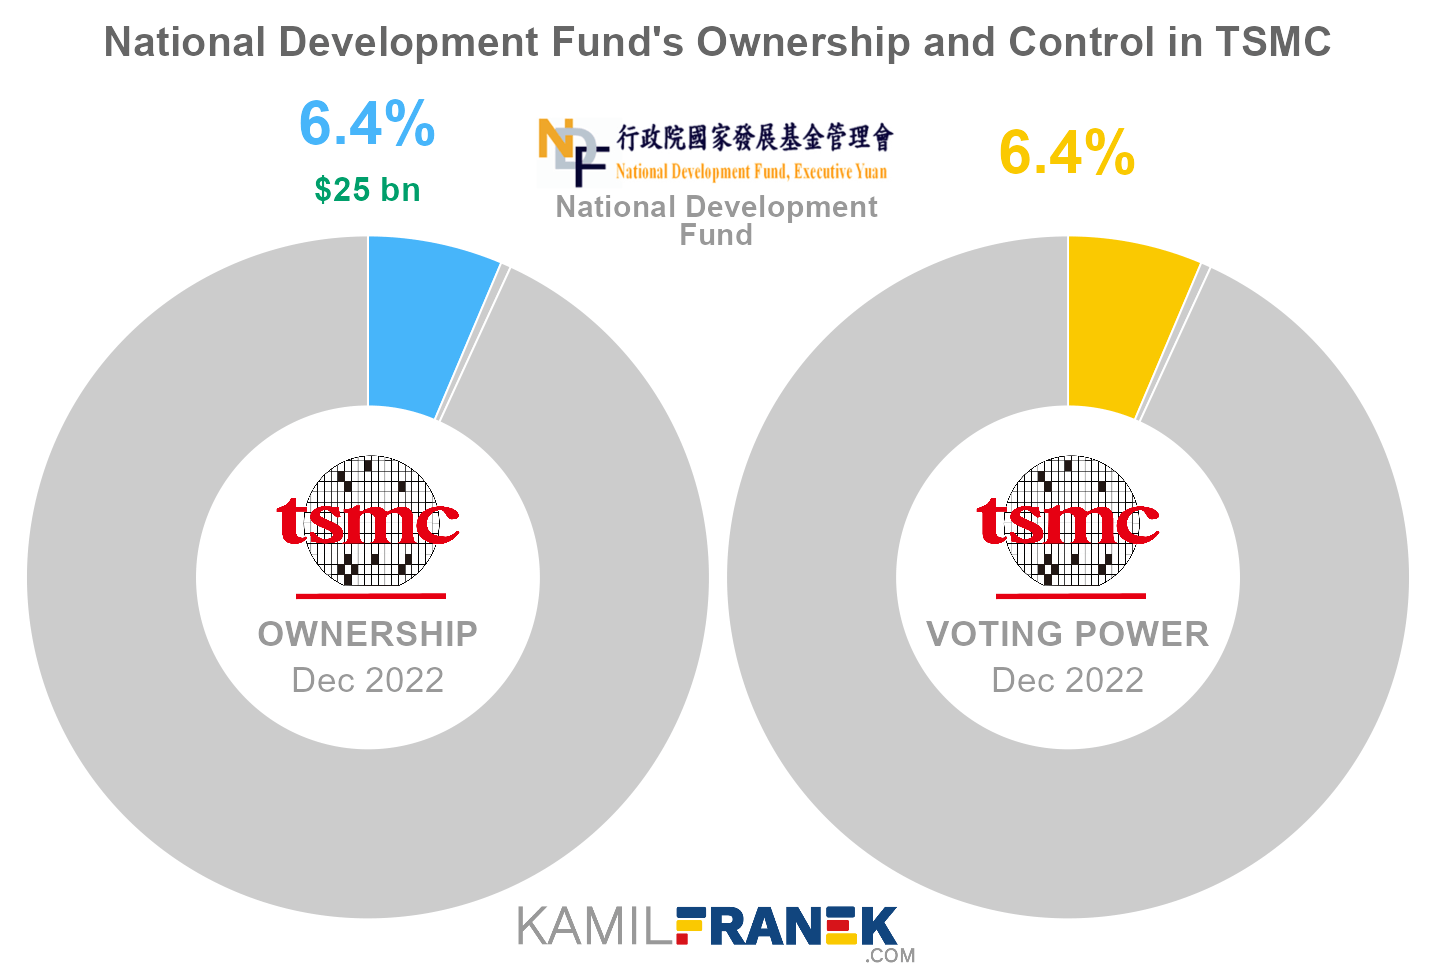 National Development Fund's share ownership and voting power in TSMC (chart)